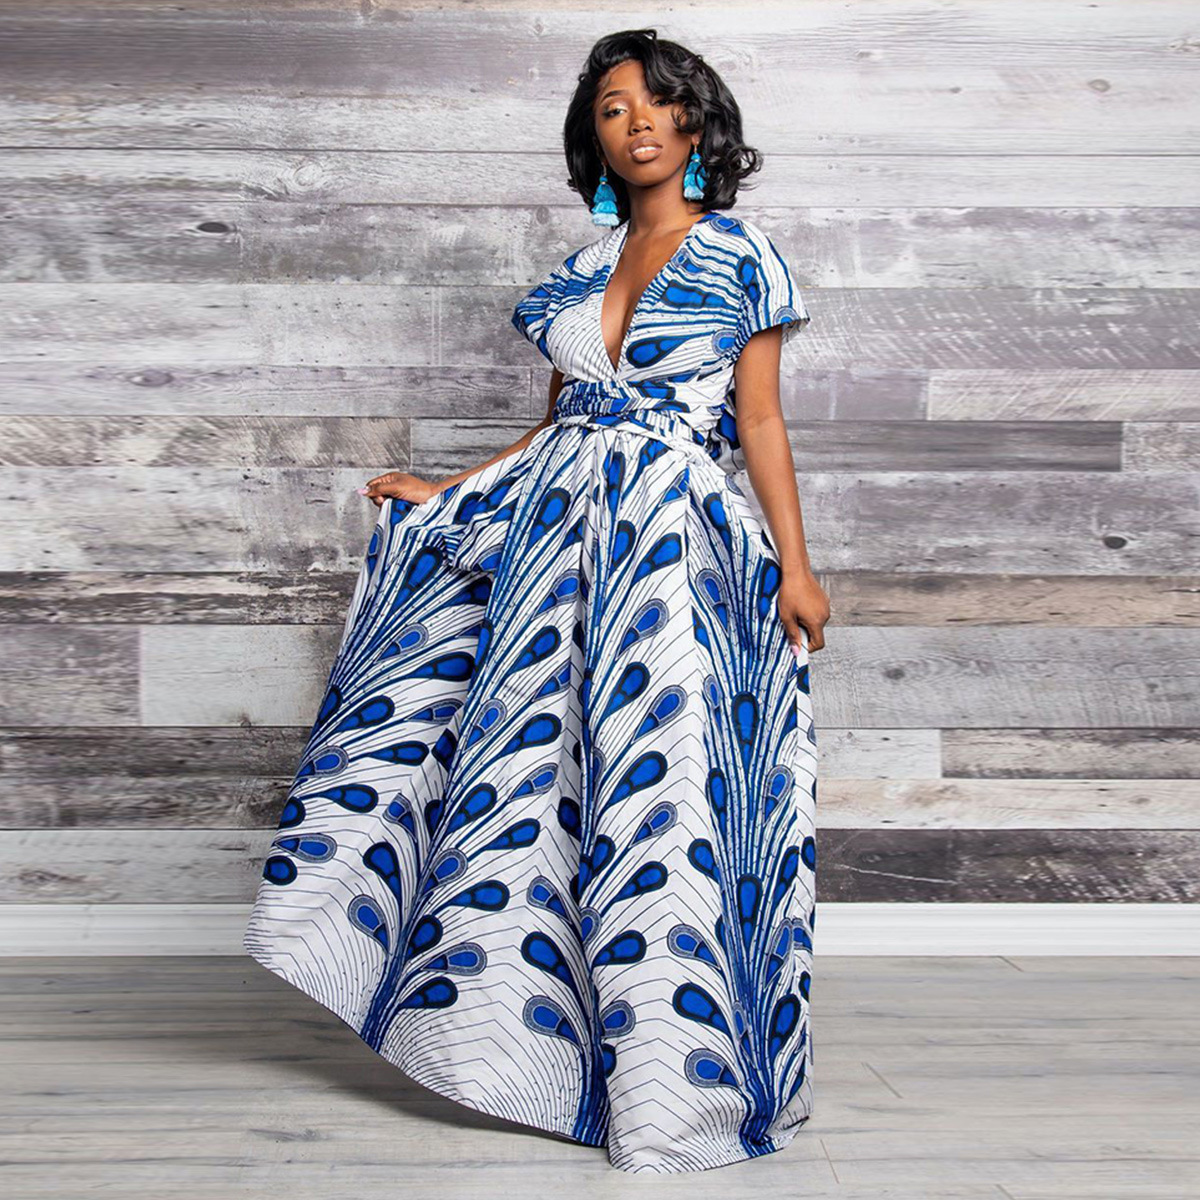 Why you should own a kitenge outfit : Kitenge designs - How to